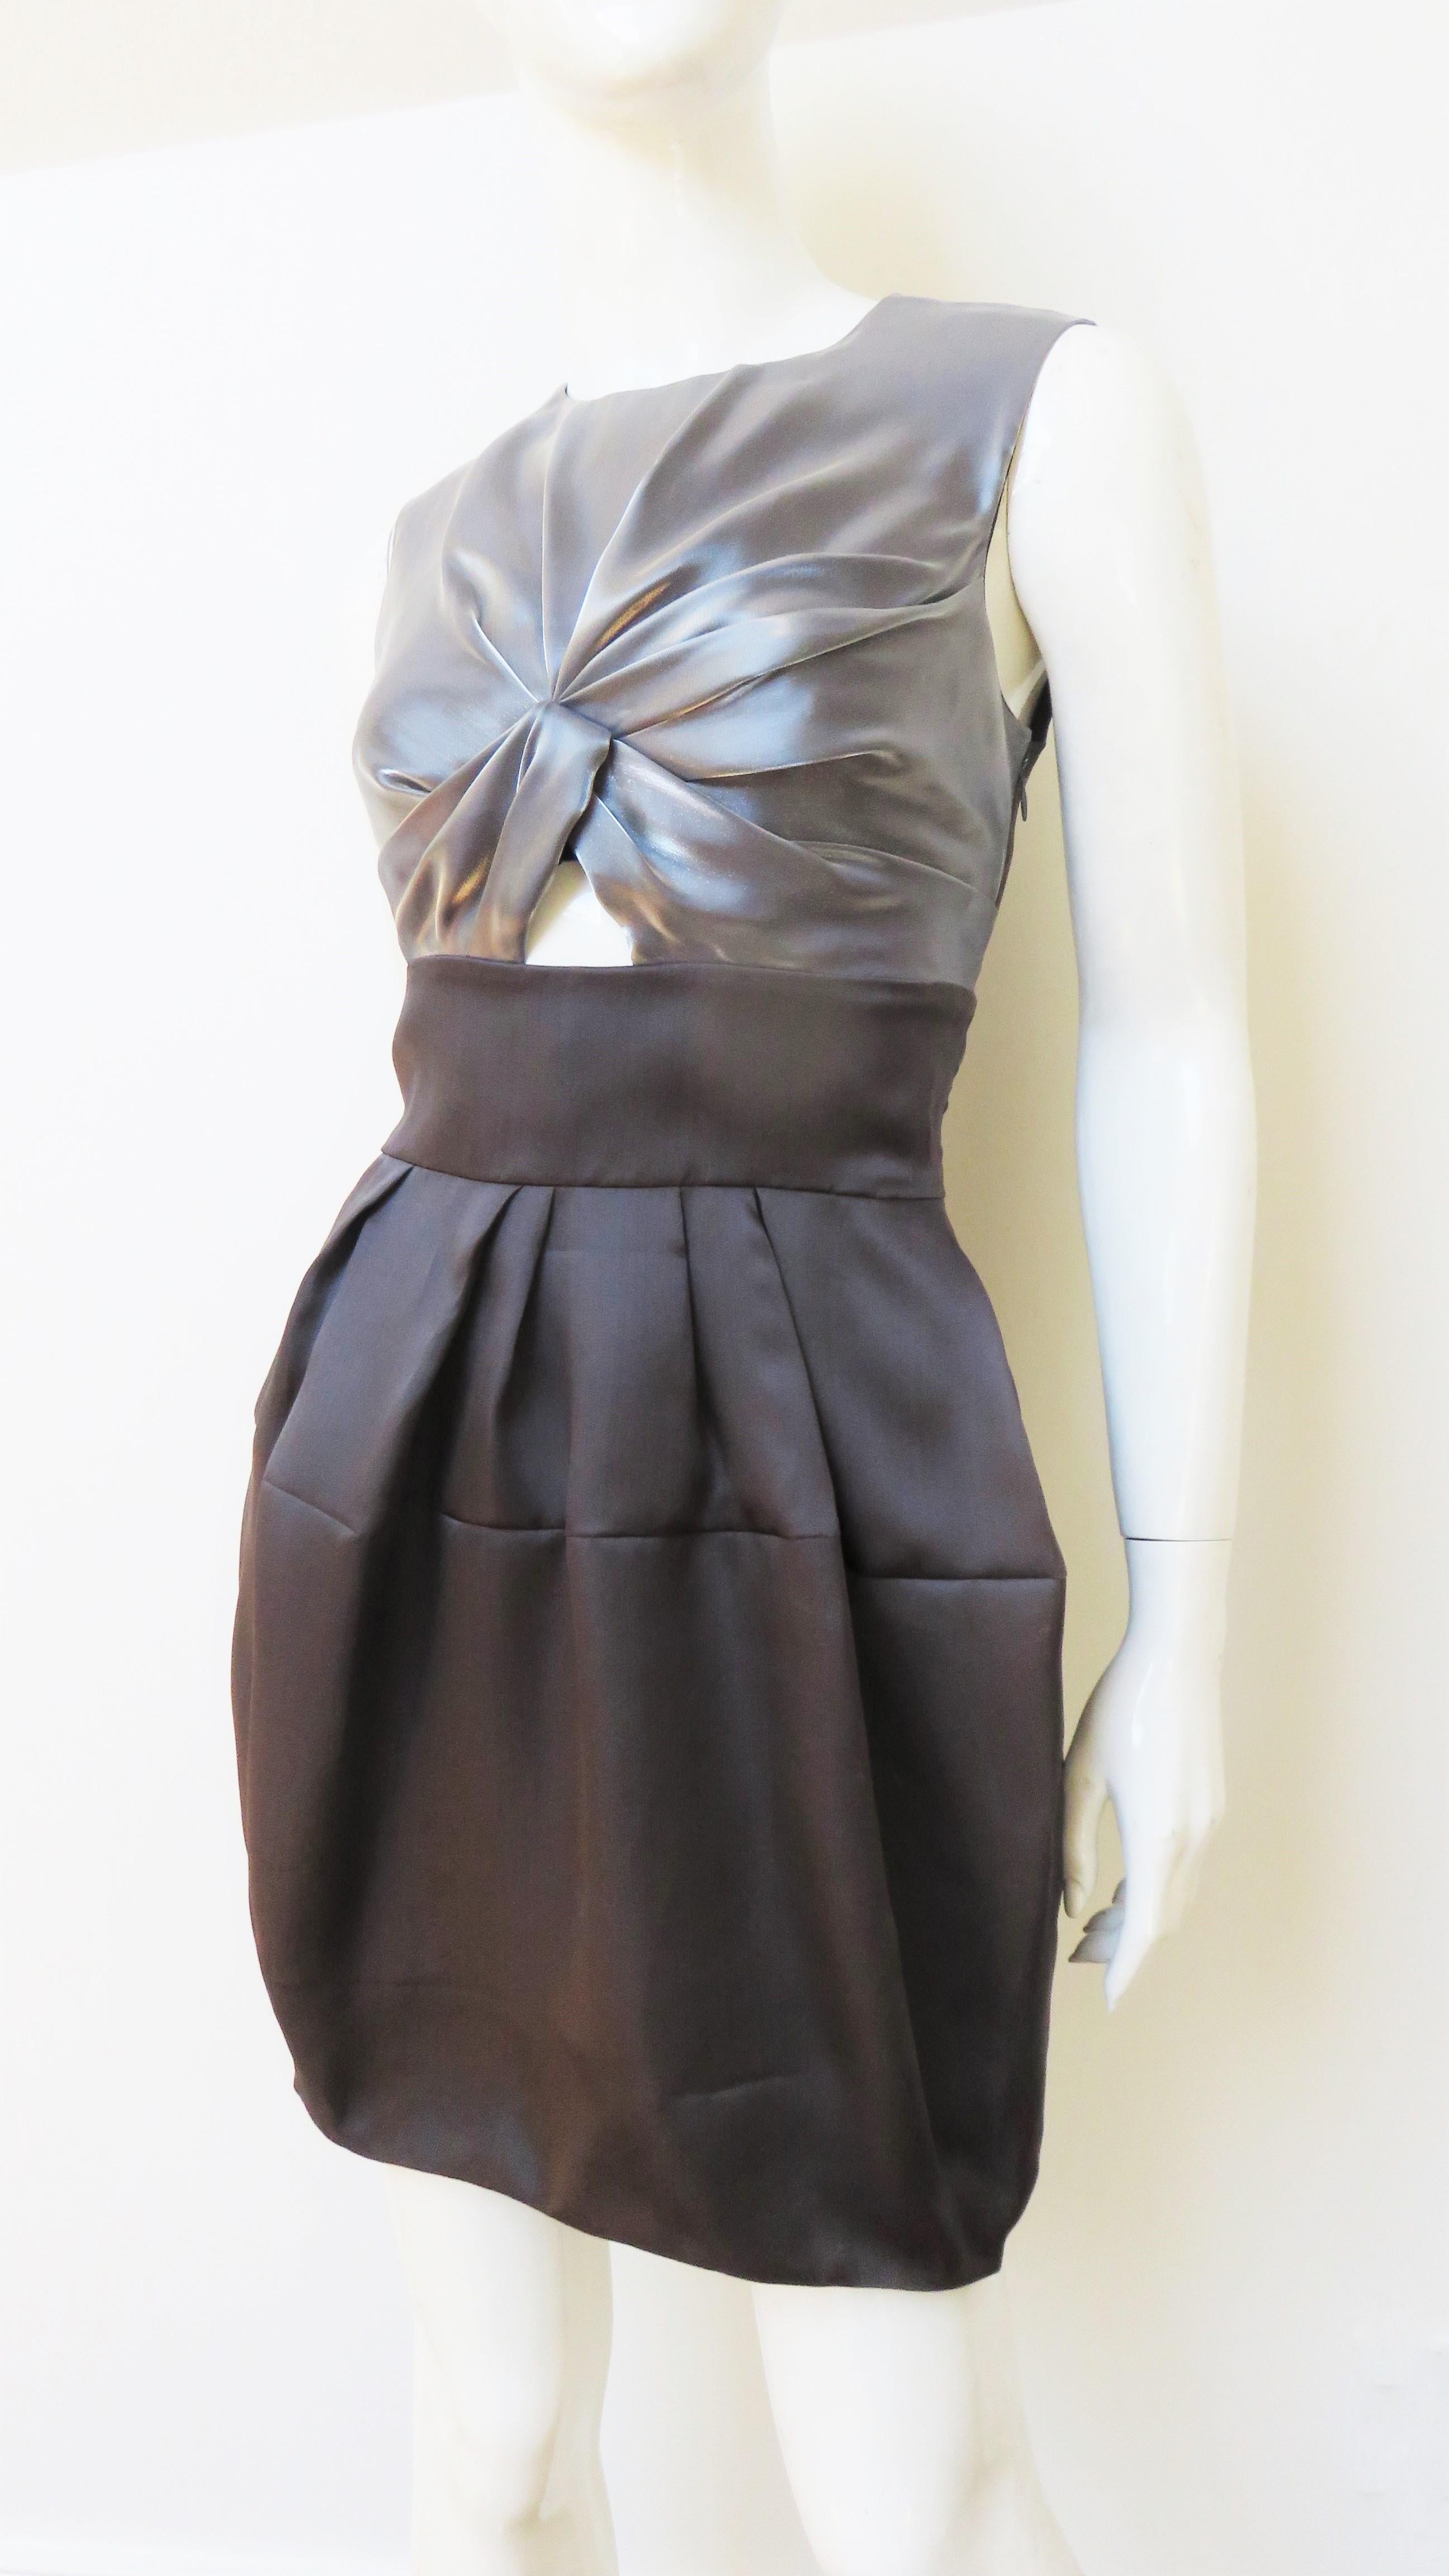 A fabulous grey and silver silk dress from Christian Dior.  It is sleeveless with a crew neckline and a ruched silver front bodice with a cut out.  The grey skirt has hip side seam pockets and is fuller at the top, narrowing towards the hem. The